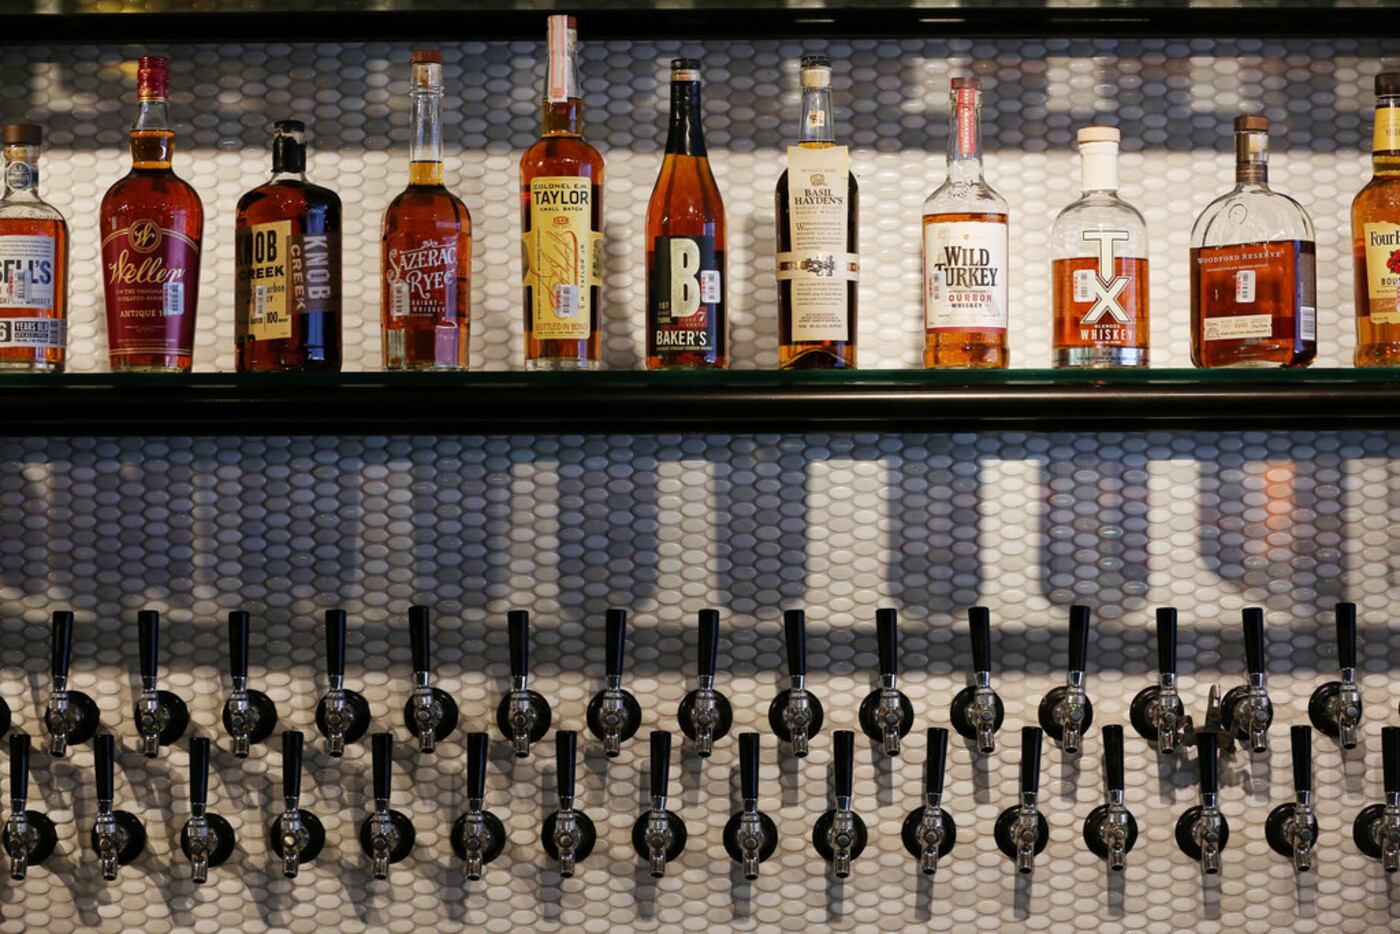 The bar inside Local Traveler has an extensive whiskey collection, plus 40 taps for beer,...